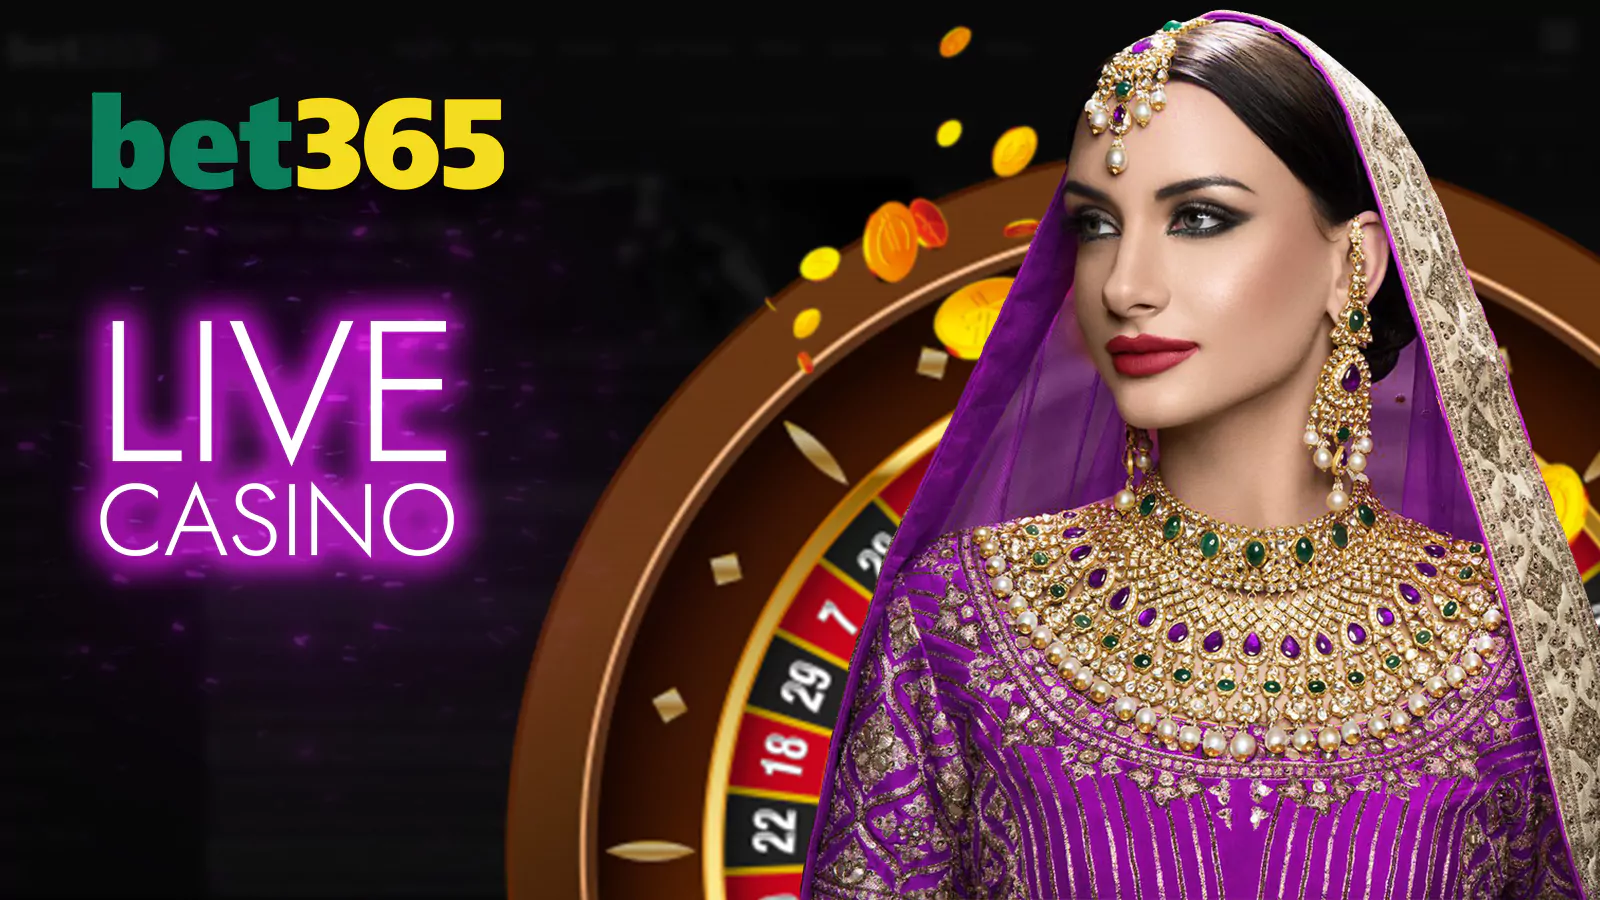 Experience the live casino games in the Bet365 casino section.